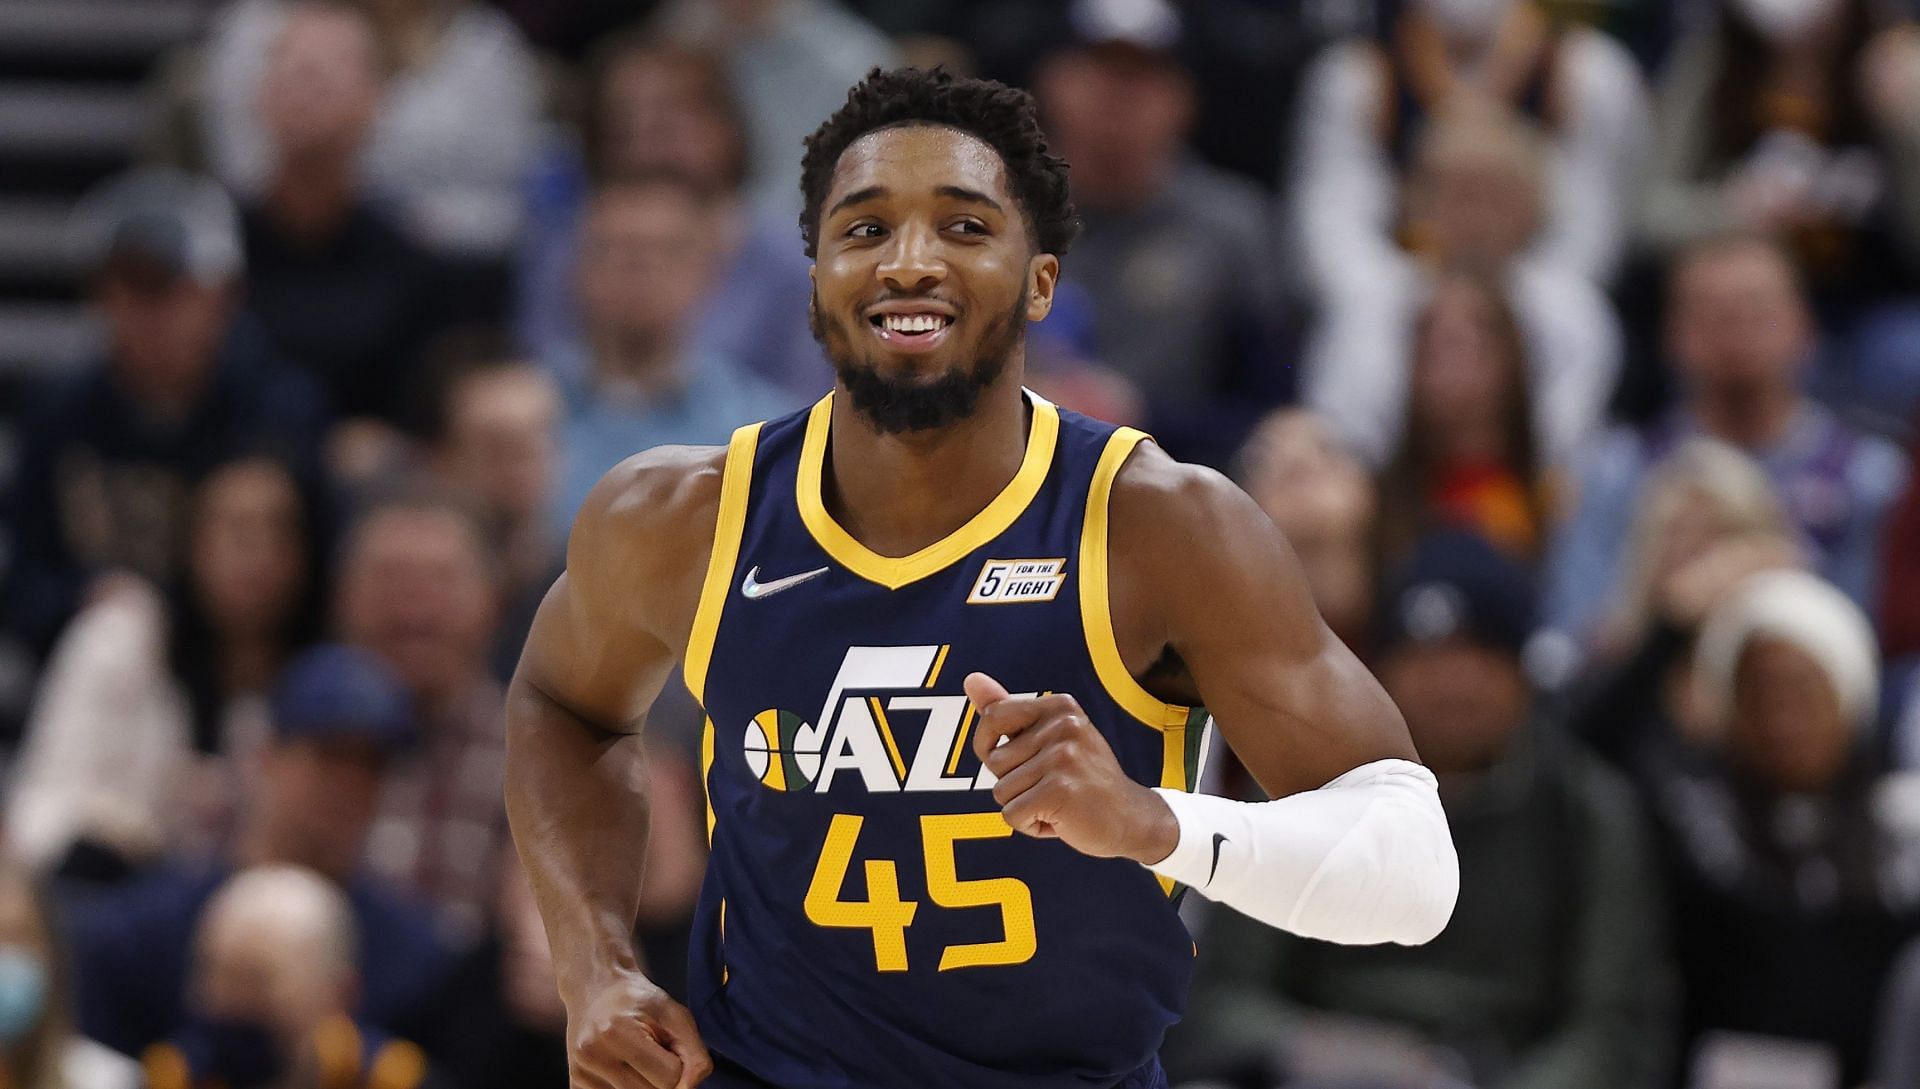 Several interested NBA teams have been unwilling to pay the price the Utah Jazz have set for Donovan Mitchell. [Photo: HoopsHype]